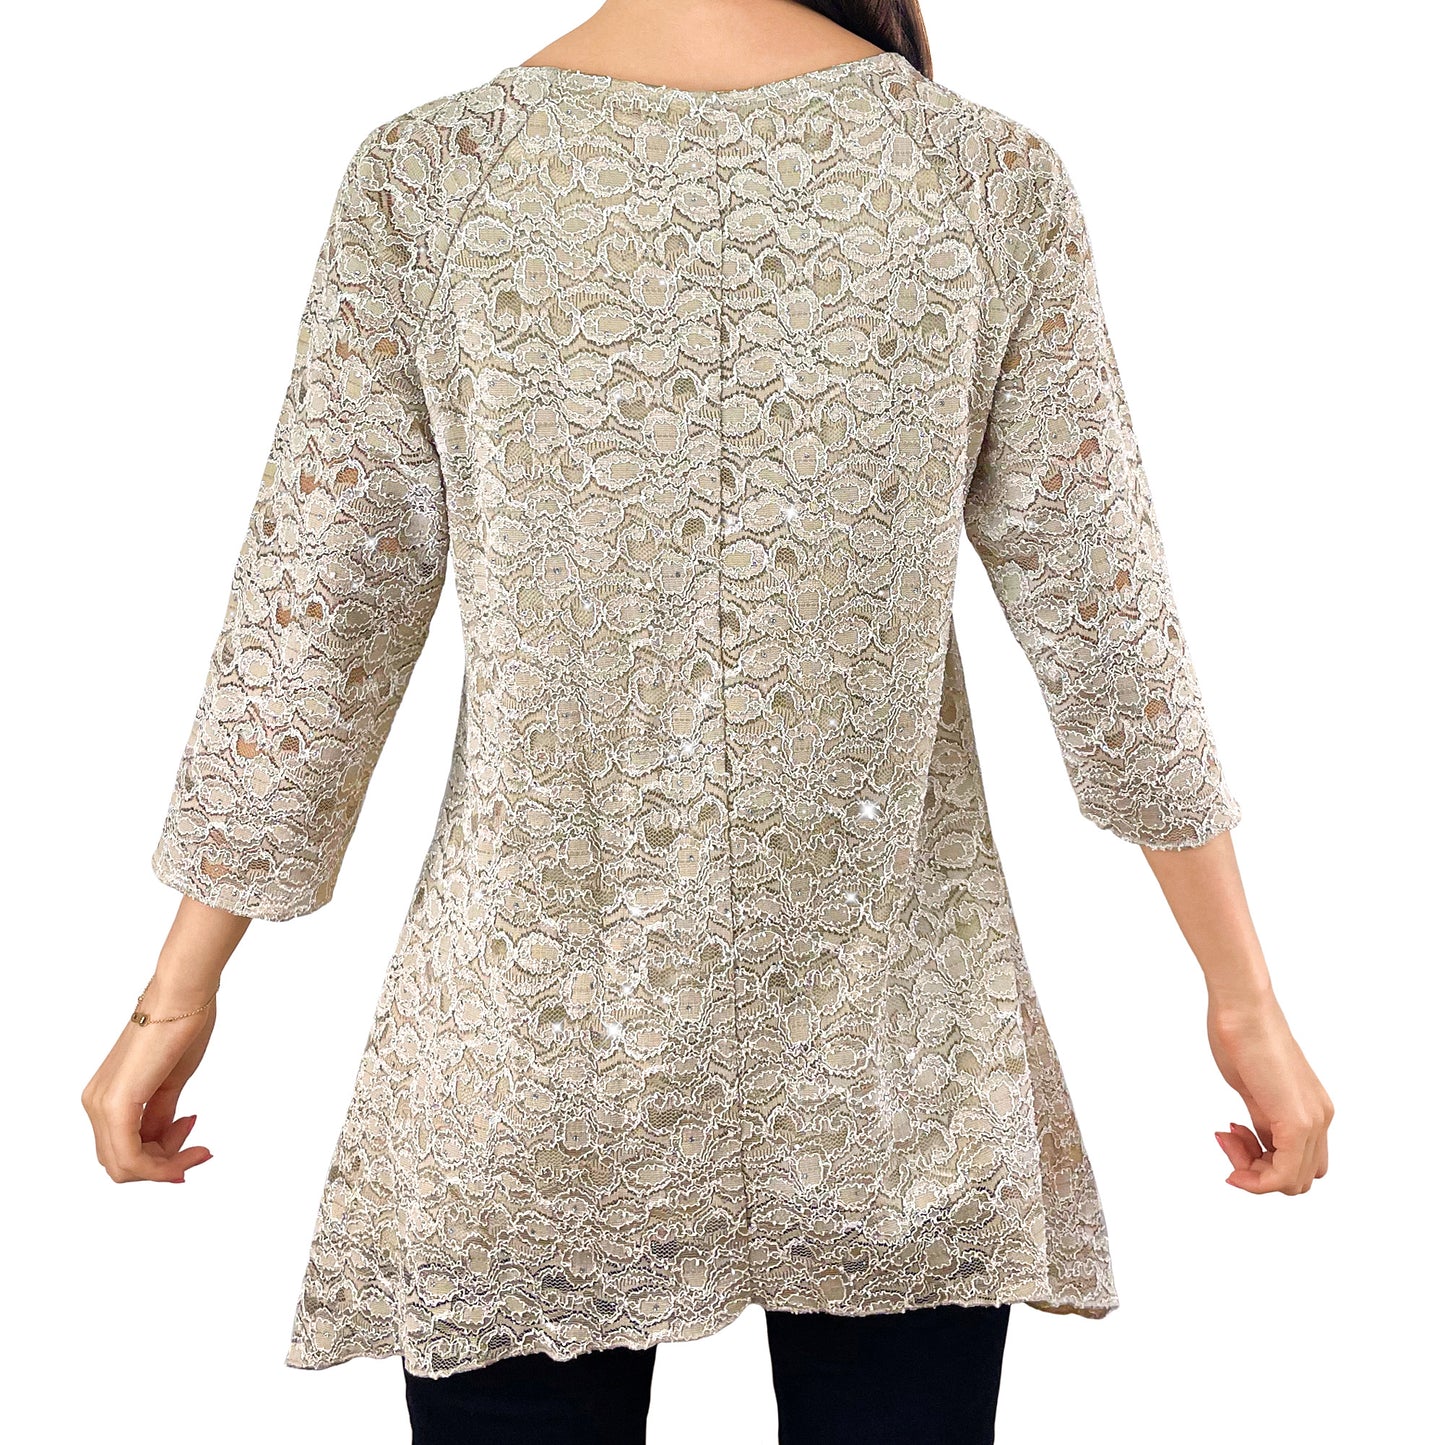 Sparkly Silver Glitter/Embroidery Champagne Floral Lace Top Tunic Knit Blouse